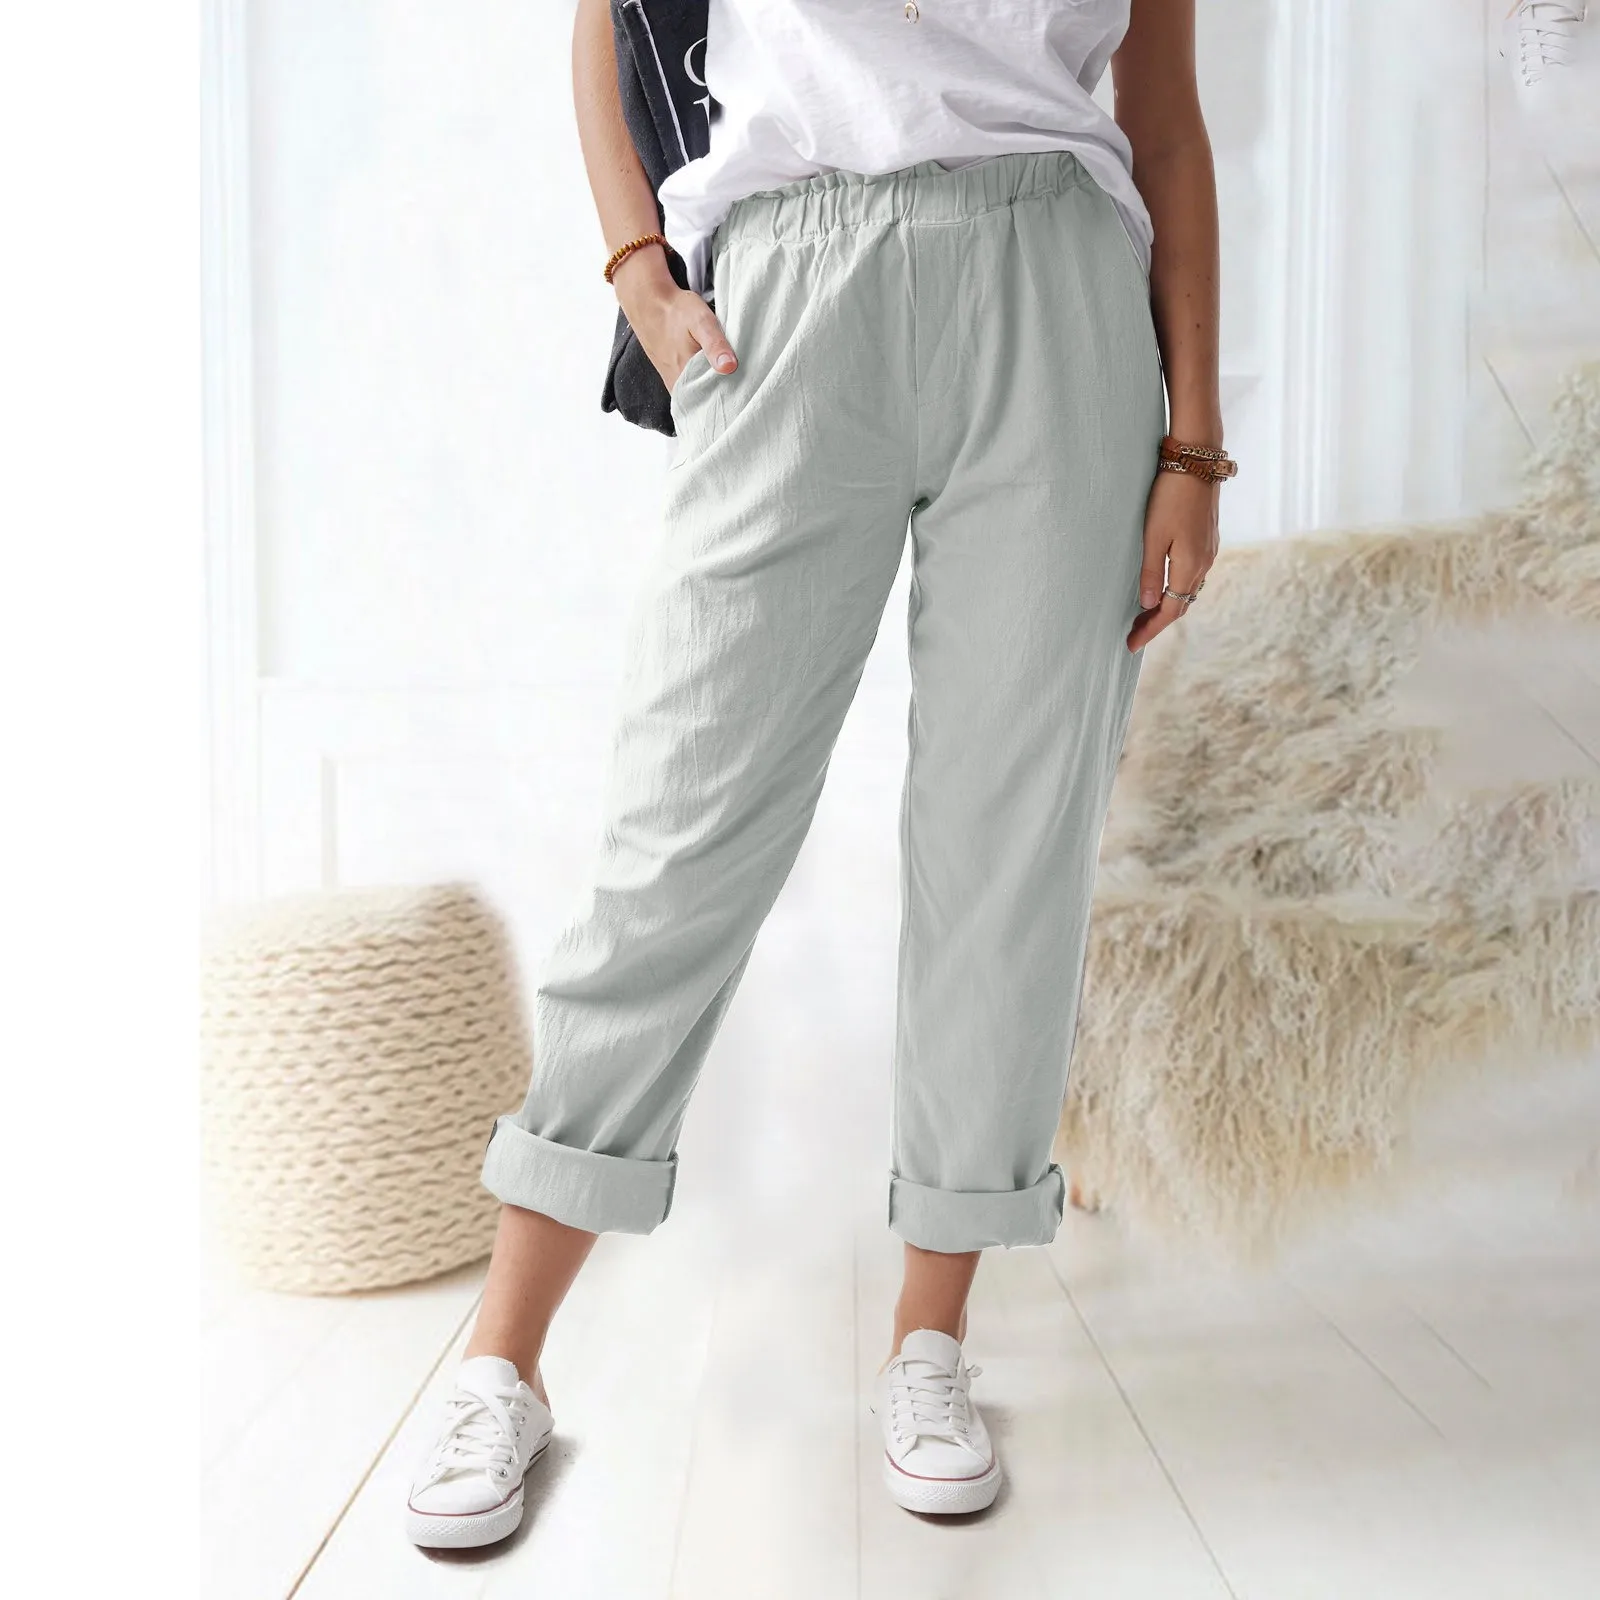 Cotton Linen Harem Pants for Women Vintage Casual Solid Elastic Waist Straight Pants with Pockets Beach Work Busines Trousers